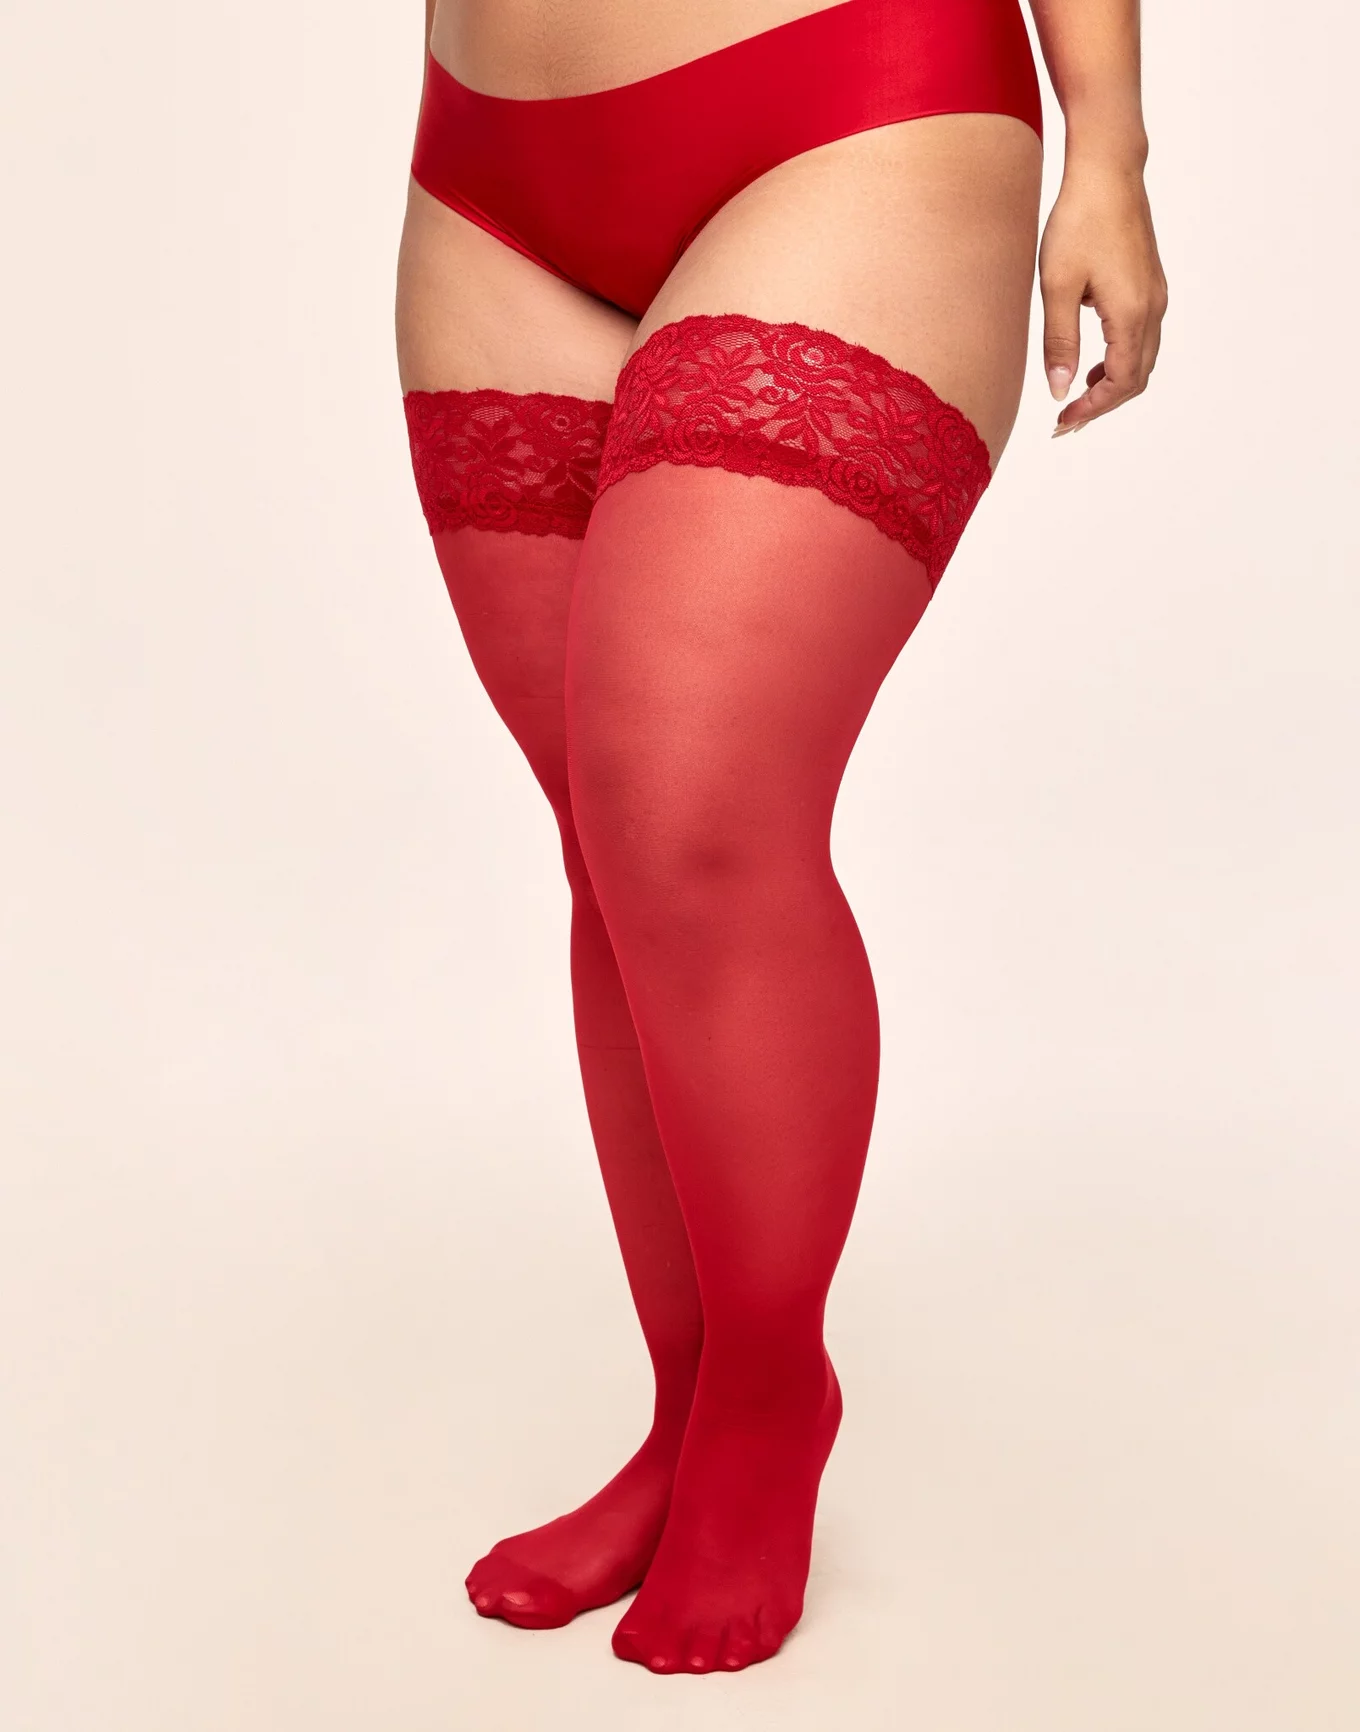 Plus Size Women's Long Thigh High Socks for Thick Thighs w/ Garter